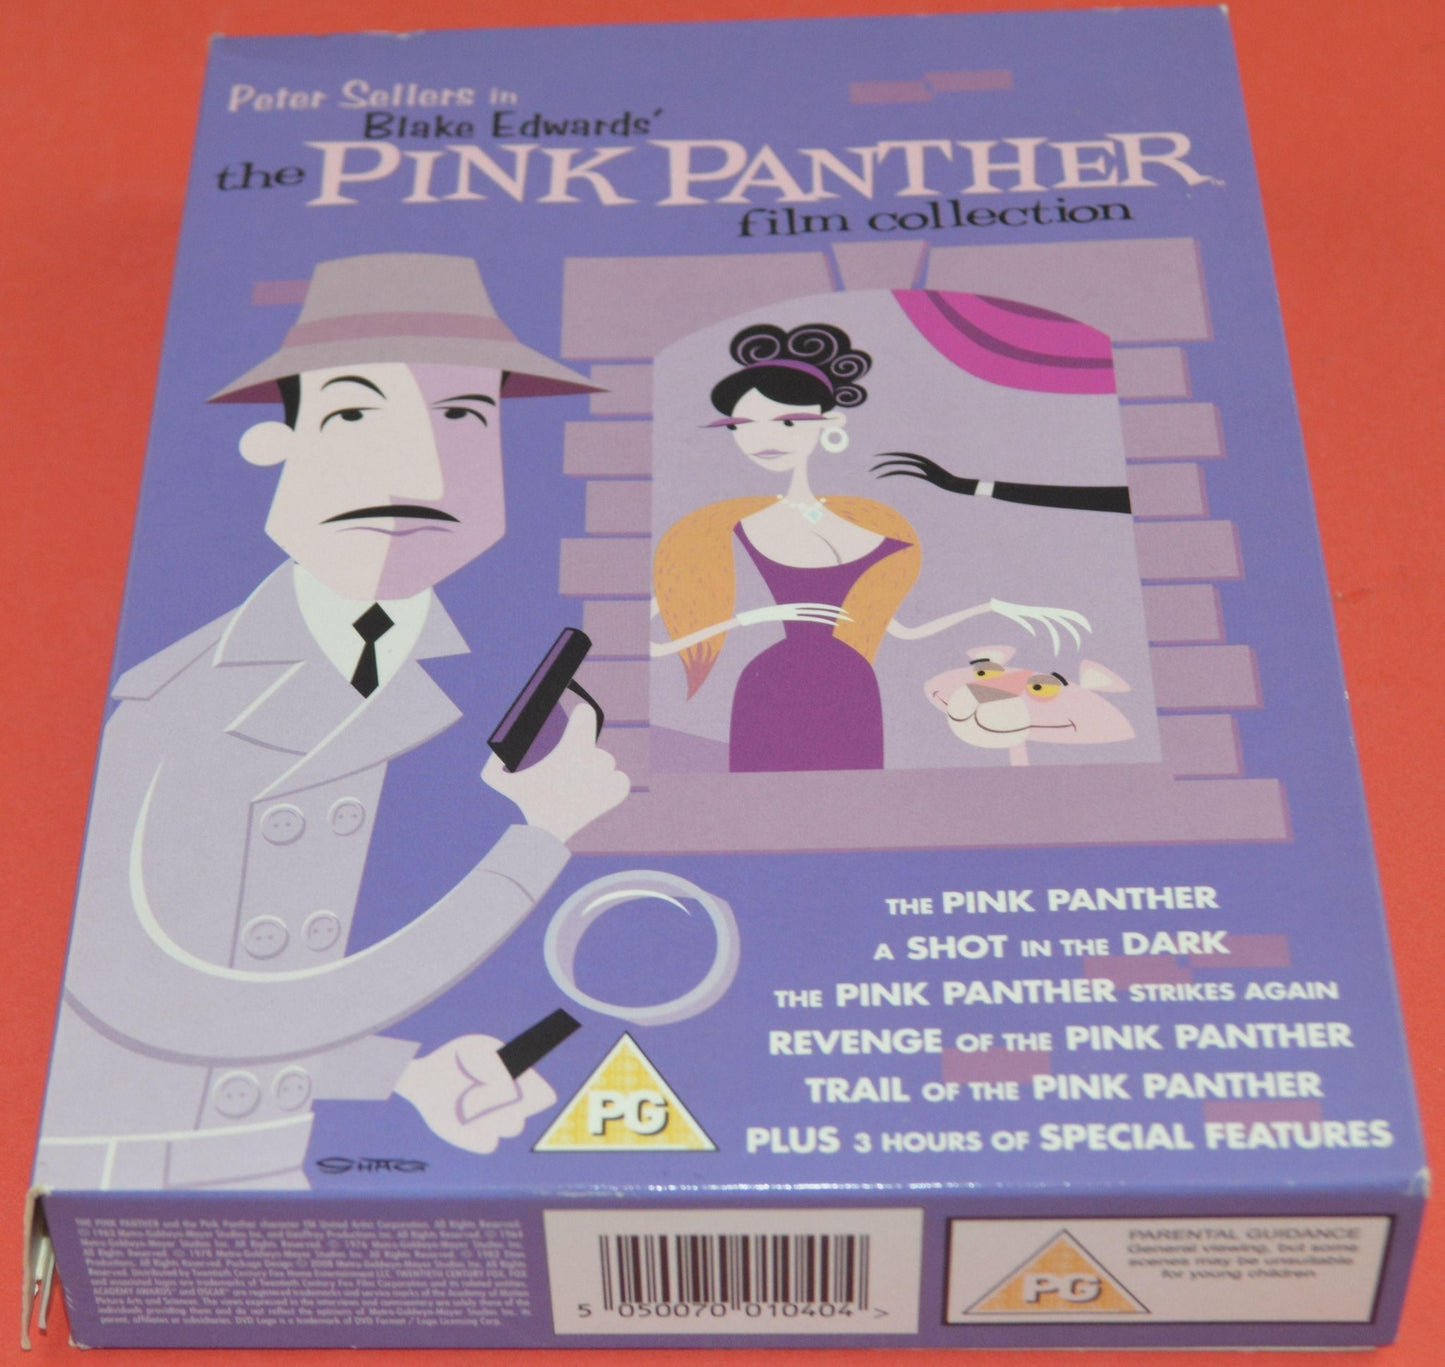 DVD BOX SET PINK PANTHER FILM COLLECTION(PREVIOUSLY OWNED) GOOD CONDITION - TMD167207